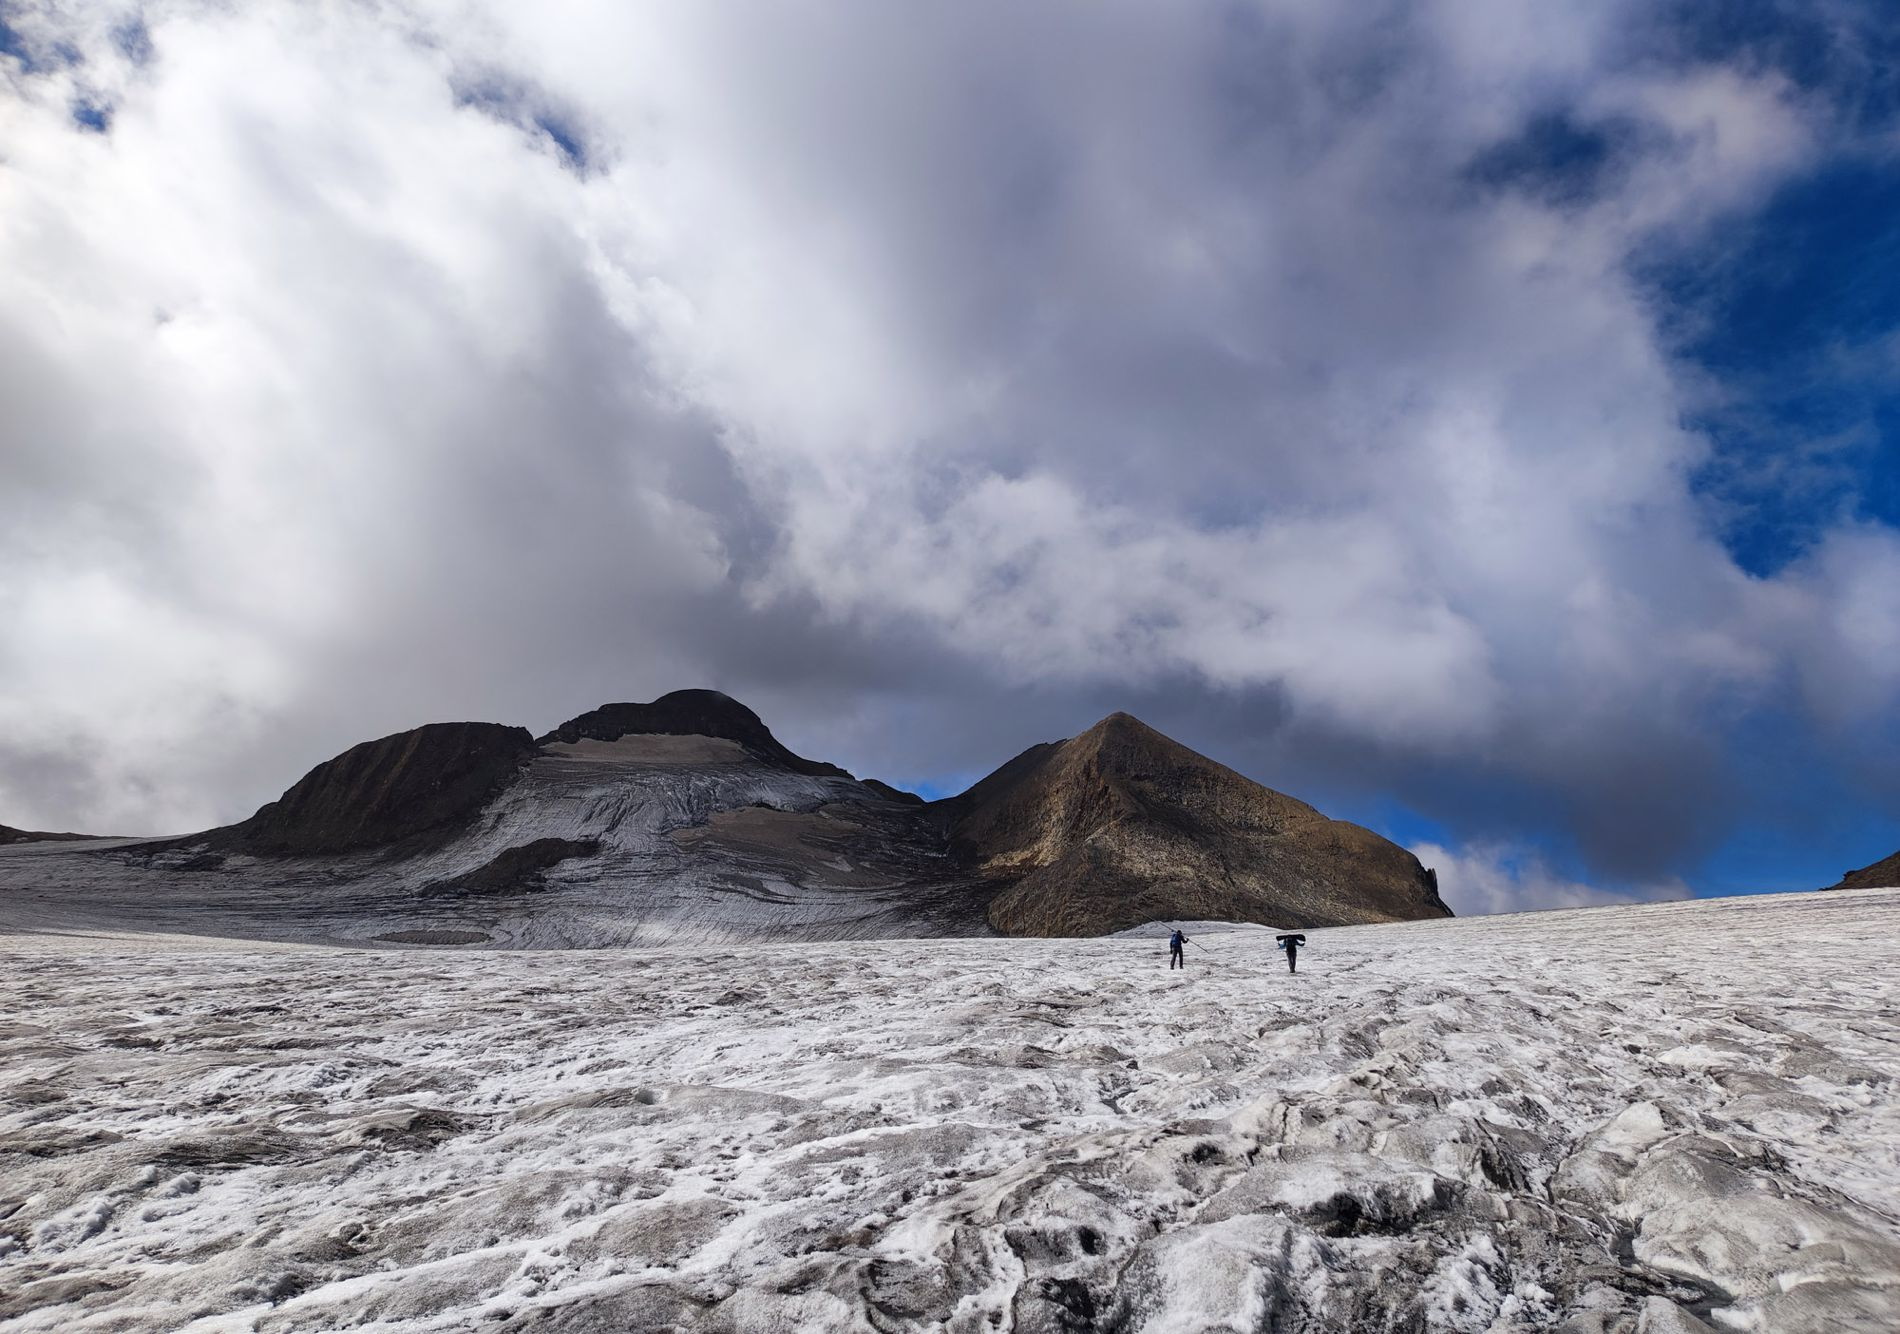 Glaciologists walk on the Gries Glacier (Valais). At the beginning of September 2022, the glacier was entirely clear of snow right up to the highest regions. Photo: Matthias Huss / Swiss Academy of Sciences